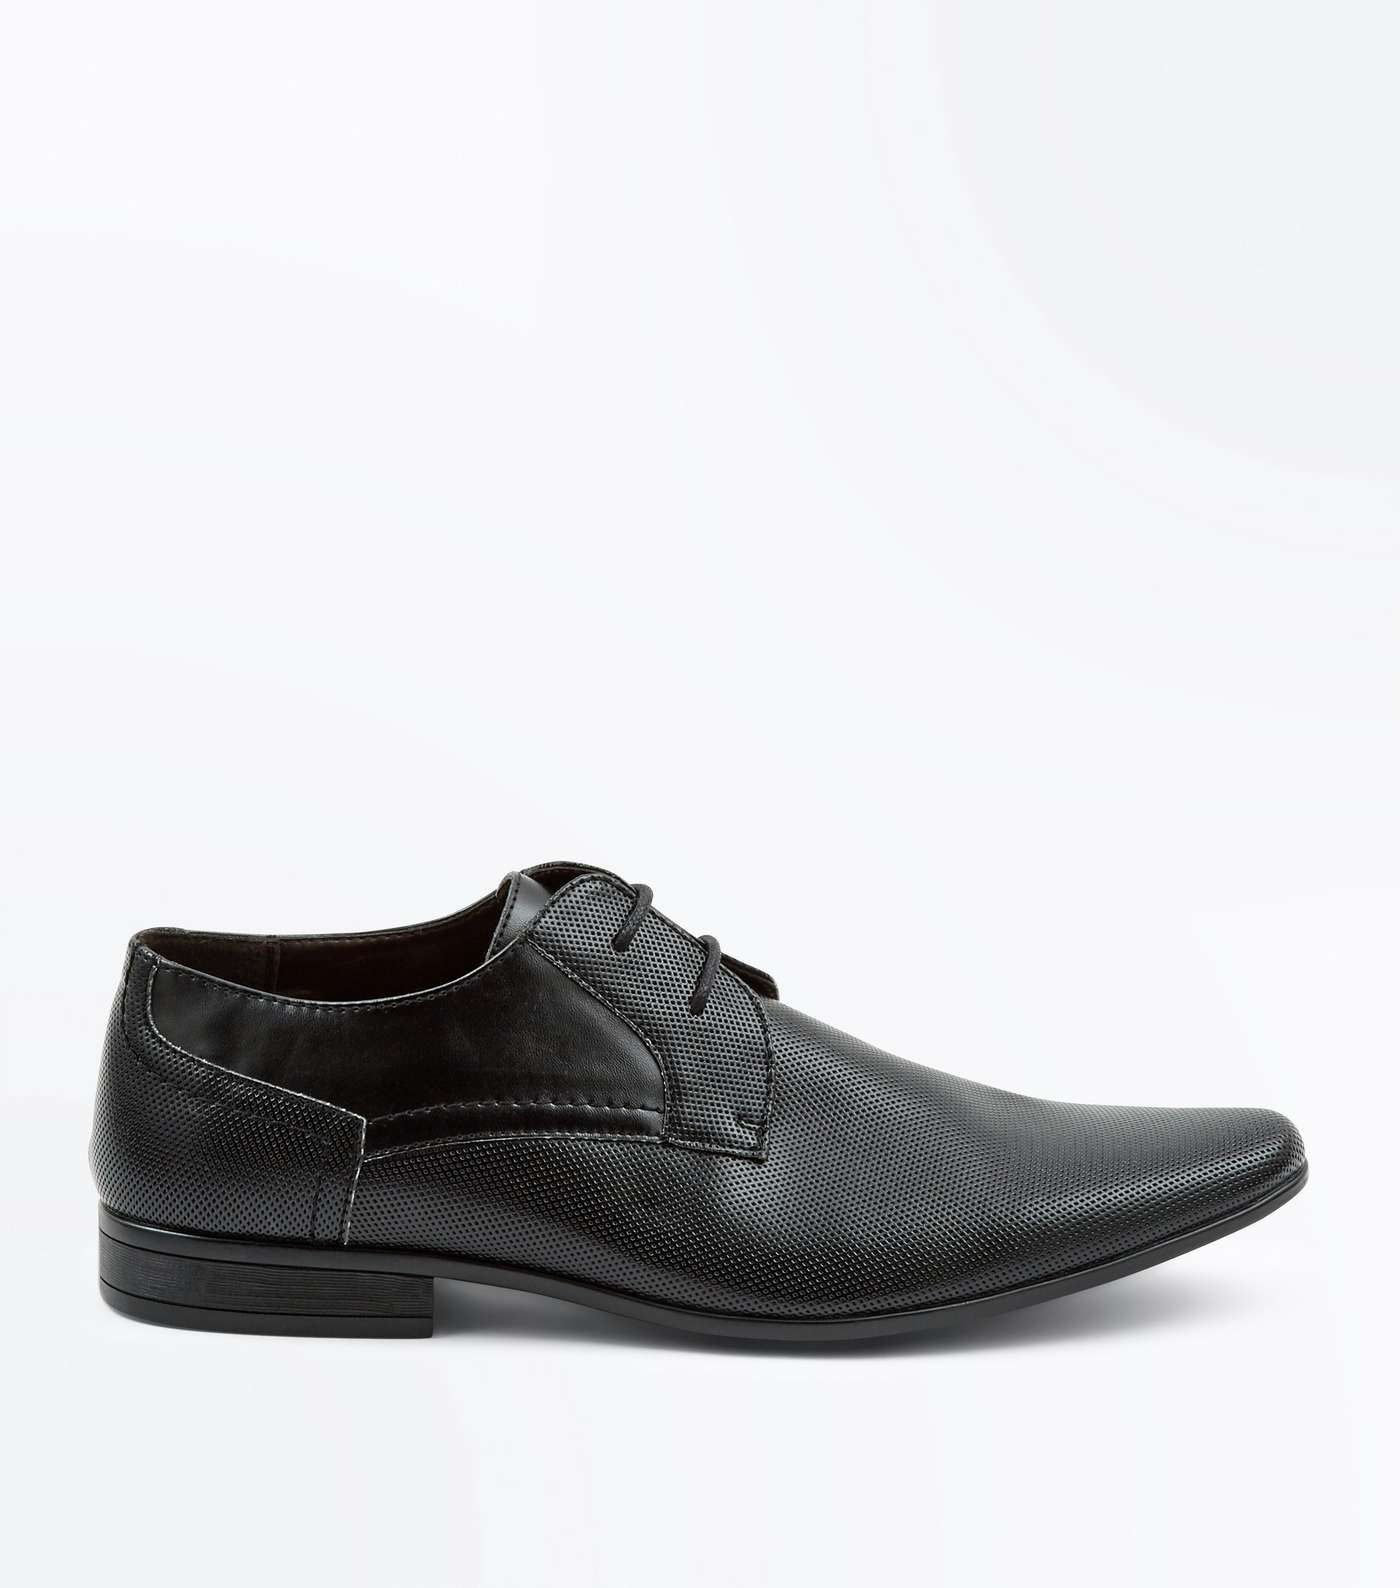 Black Perforated Formal Shoes